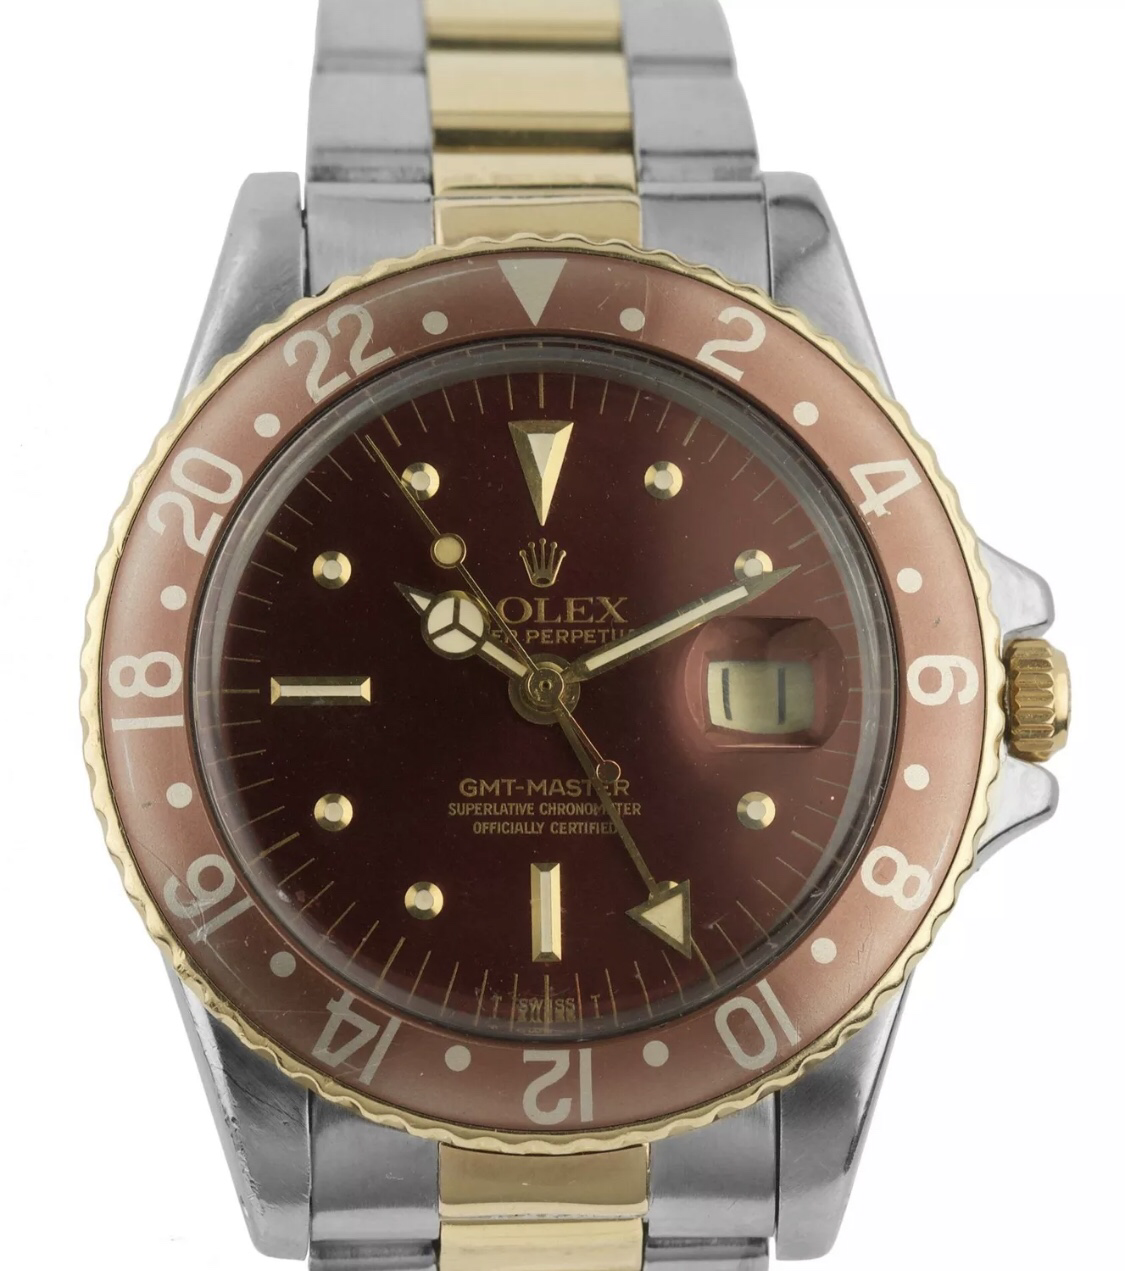 Rolex 1675 GMT Root Beer - Buying all Rolex, Breitling, Cartier, IWC, Panerai Watches